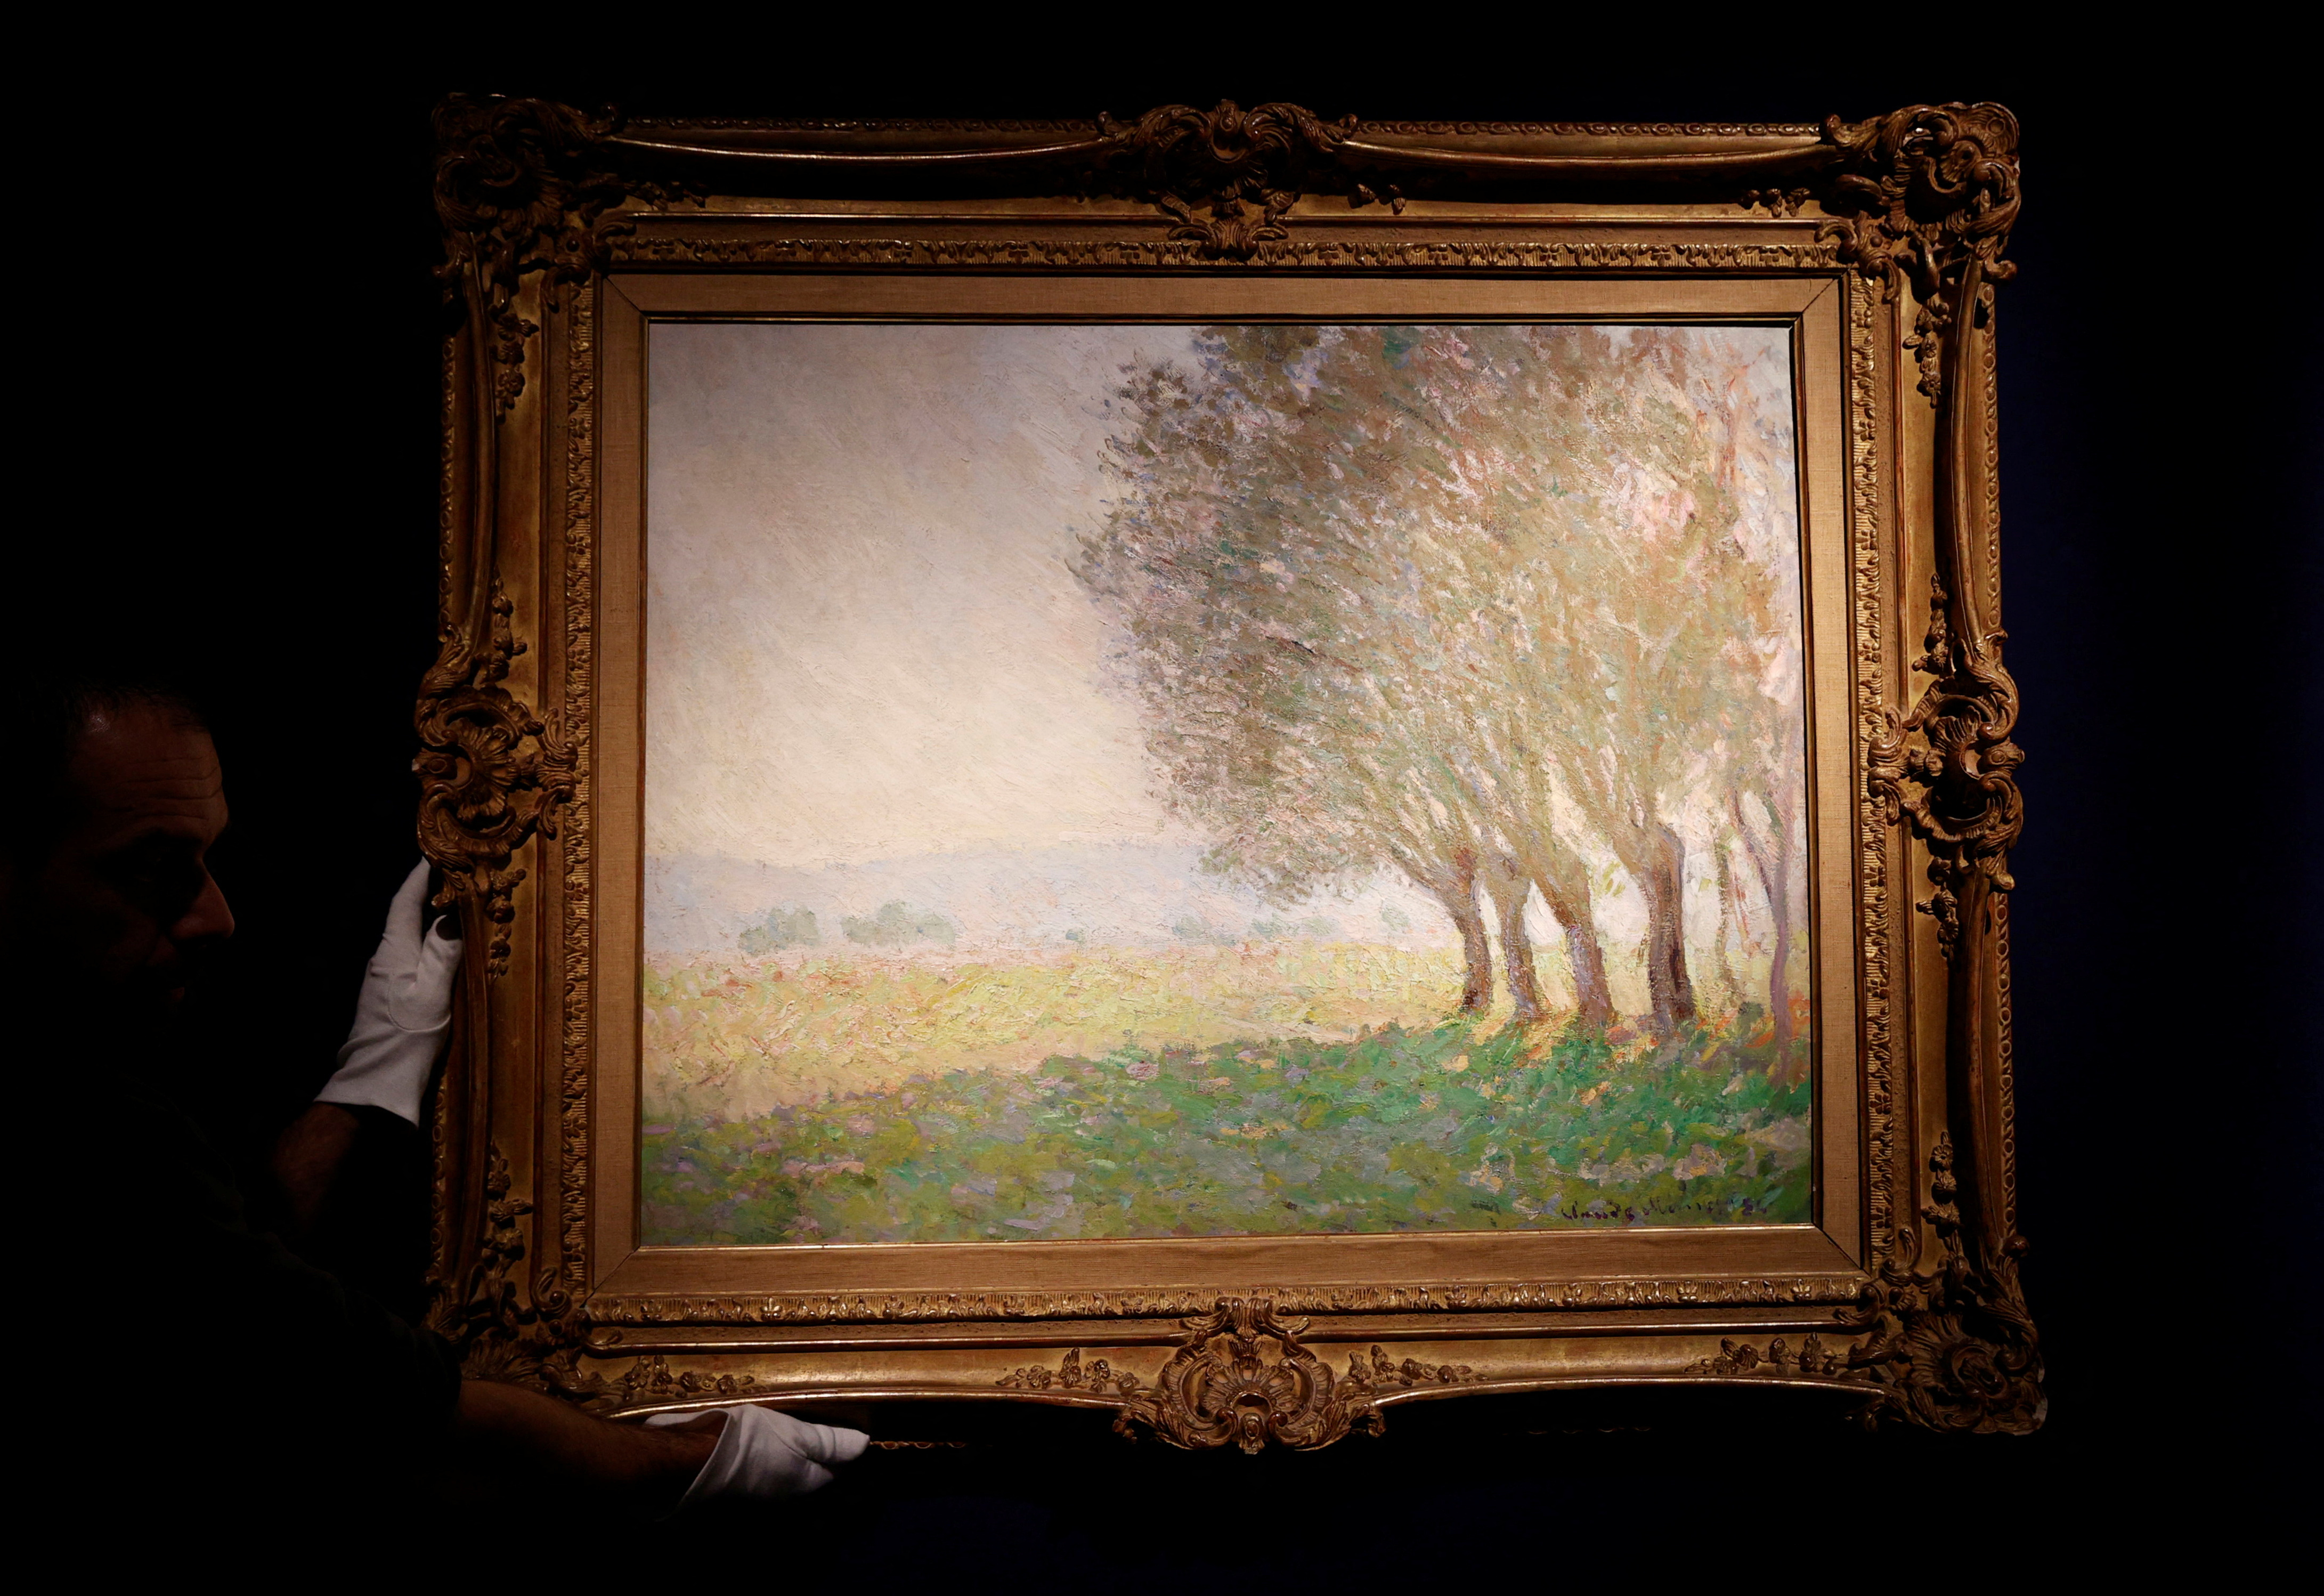 Monet painting to go on auction for first time in decades in Paris